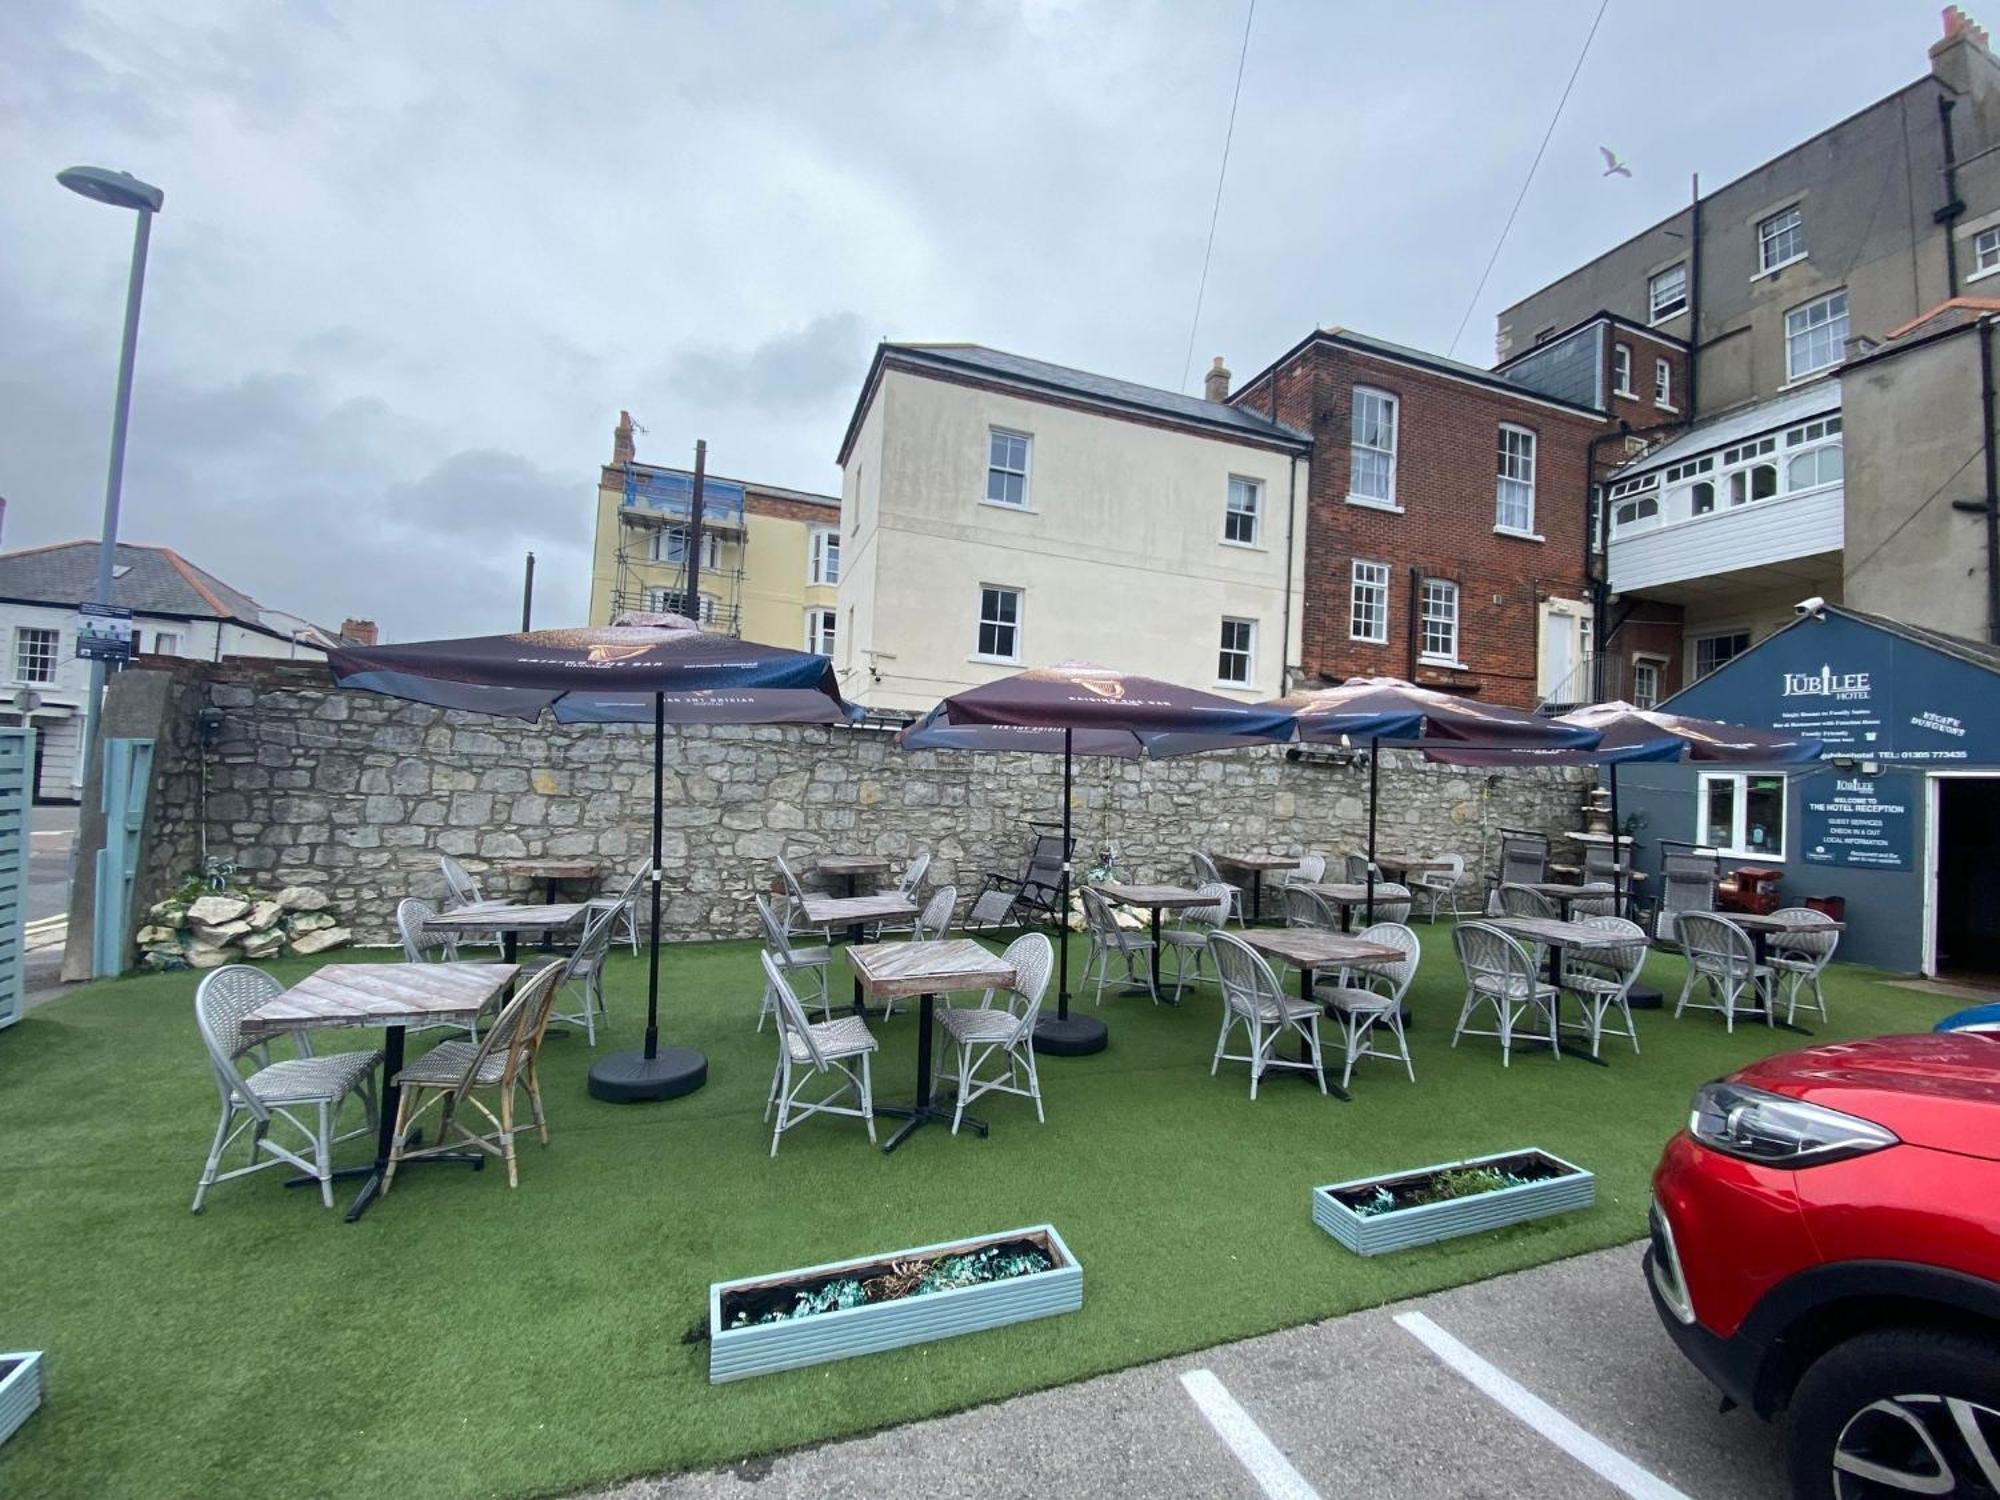 The Jubilee Hotel - With Spa And Restaurant And Entertainment Weymouth Bagian luar foto